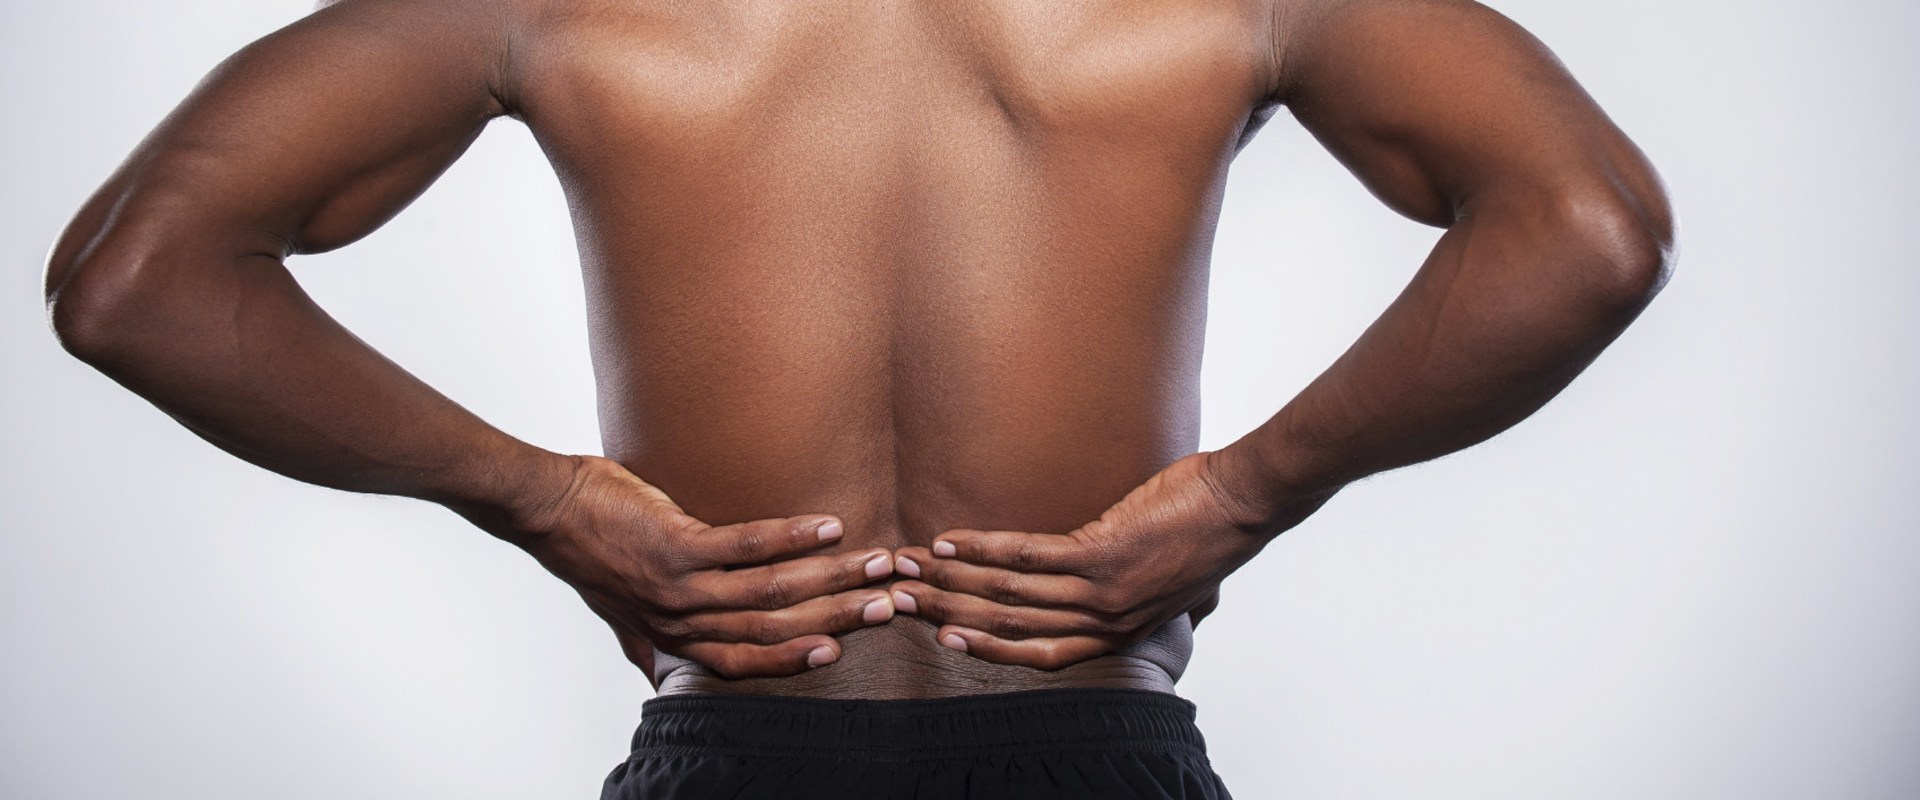 How big a problem is back pain in the world?